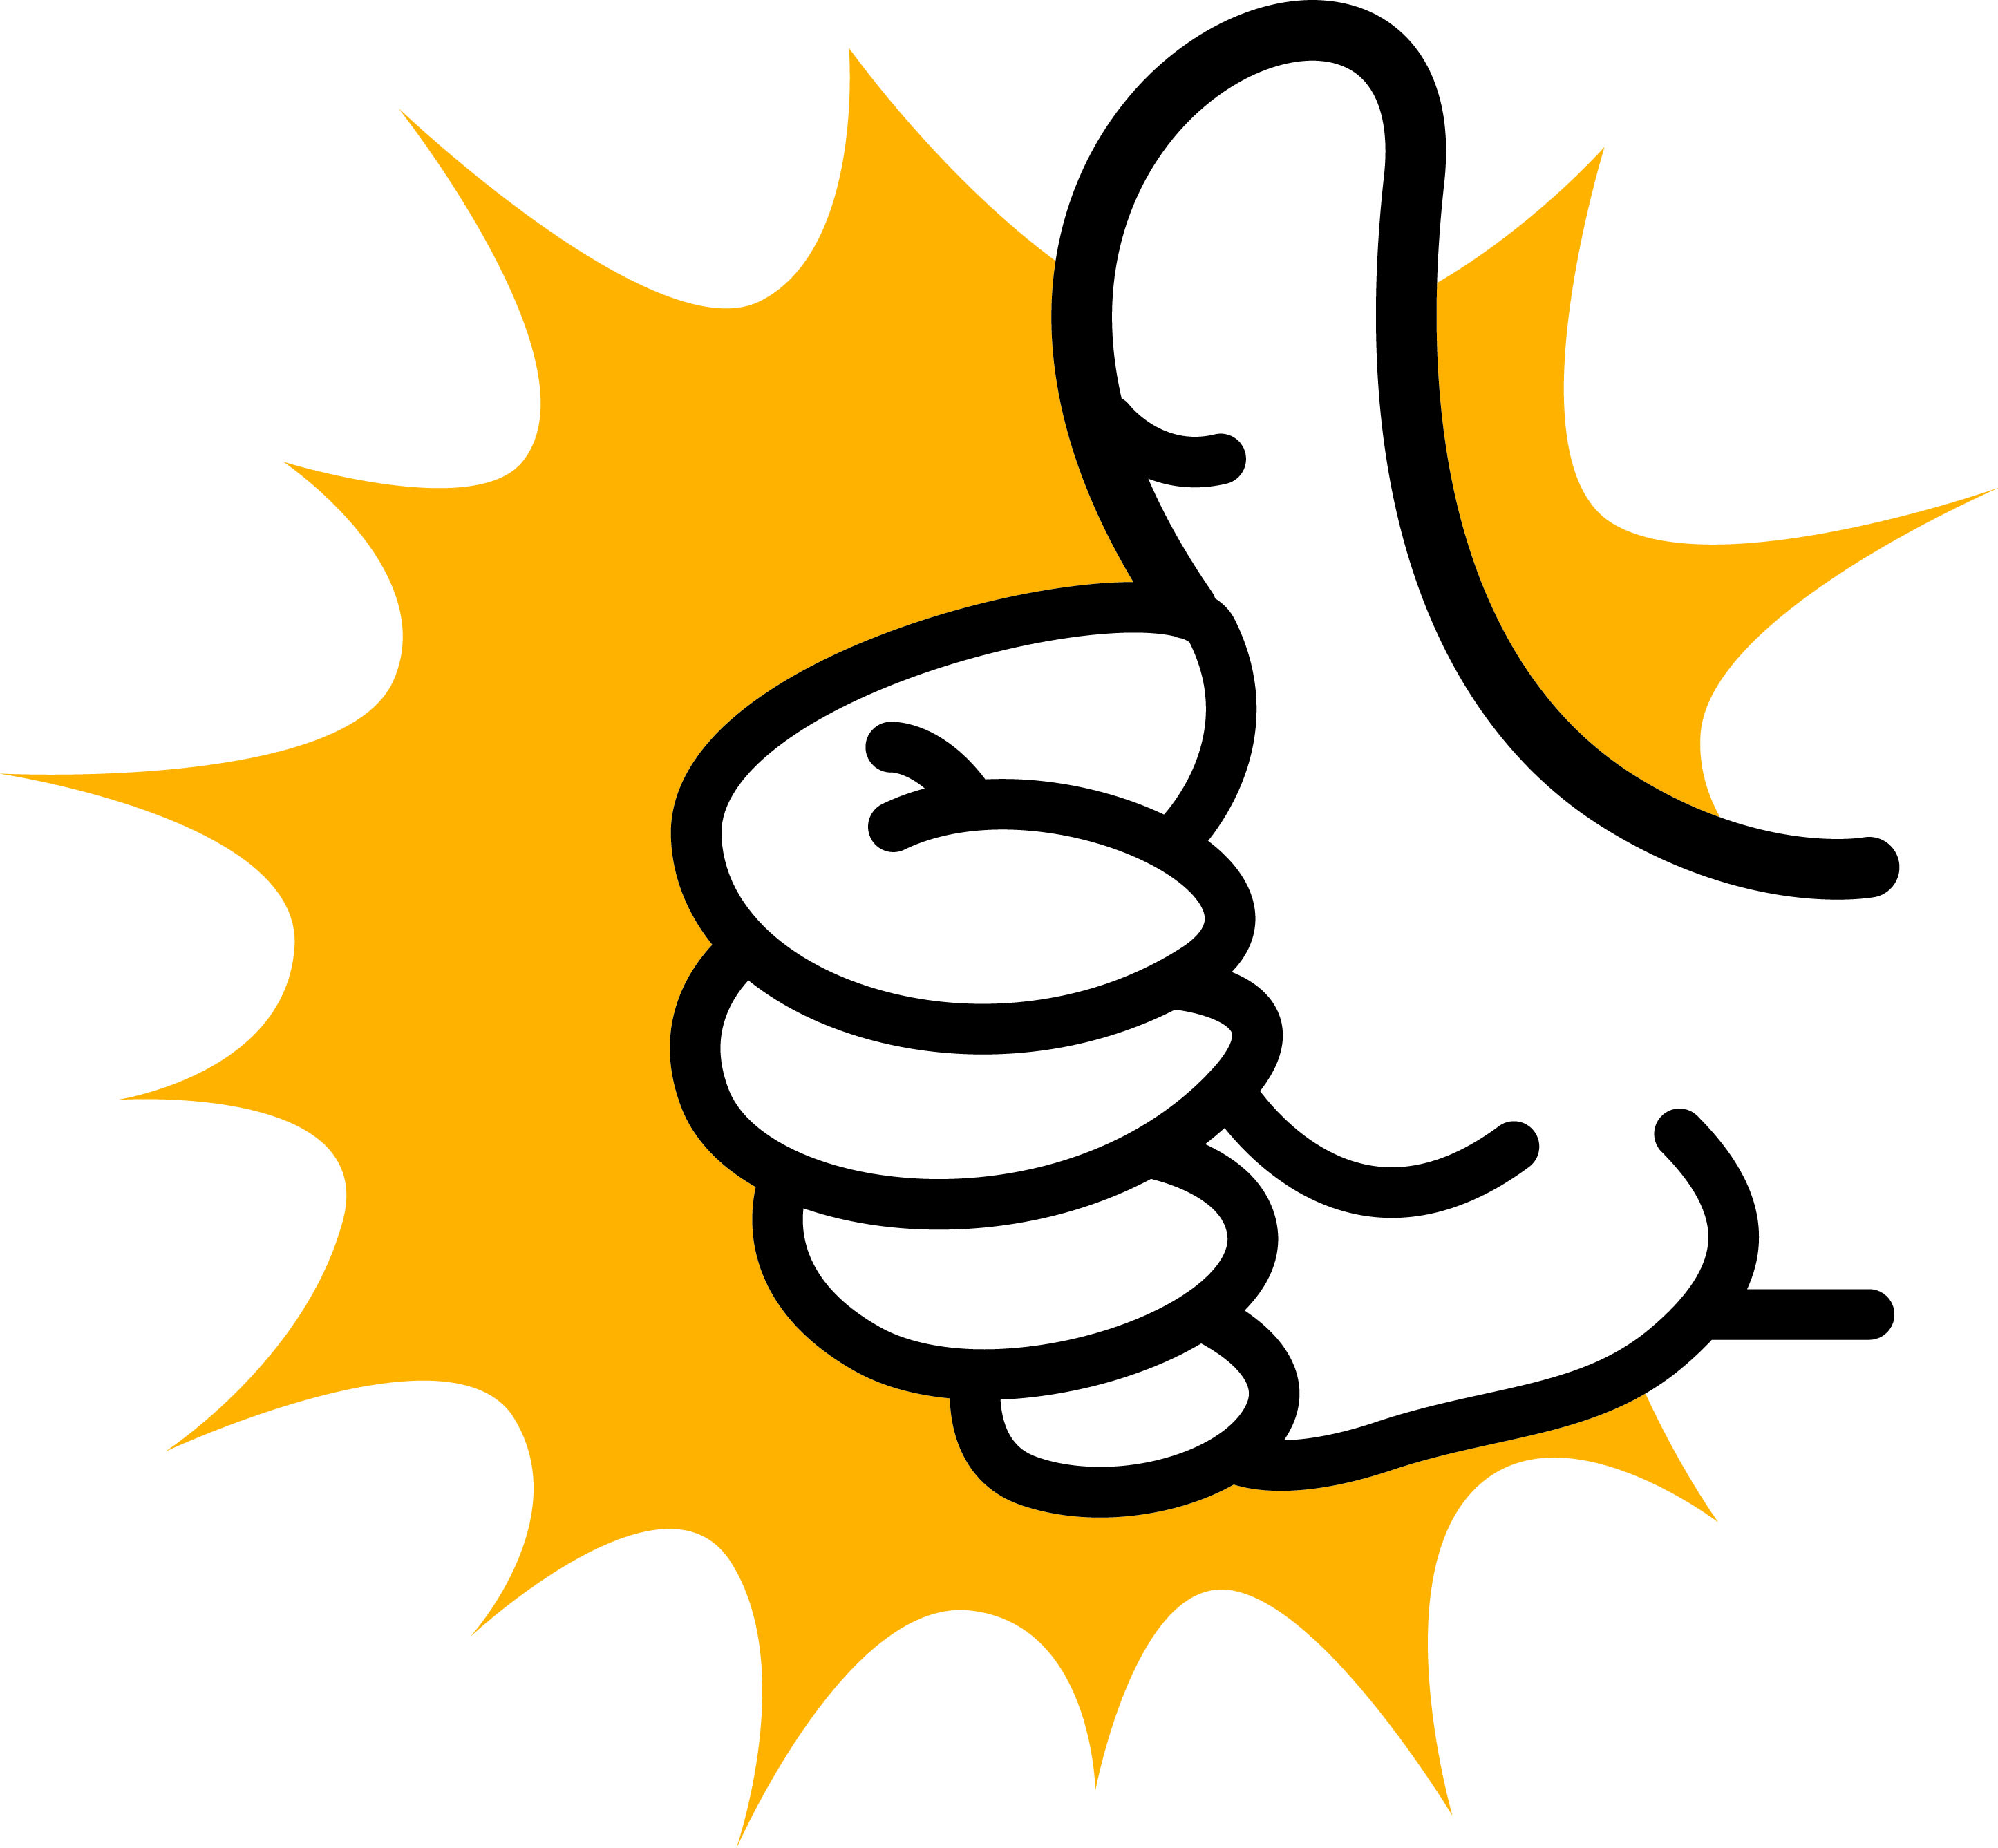 ... Thumbs Up Image - ClipArt - Best Clipart